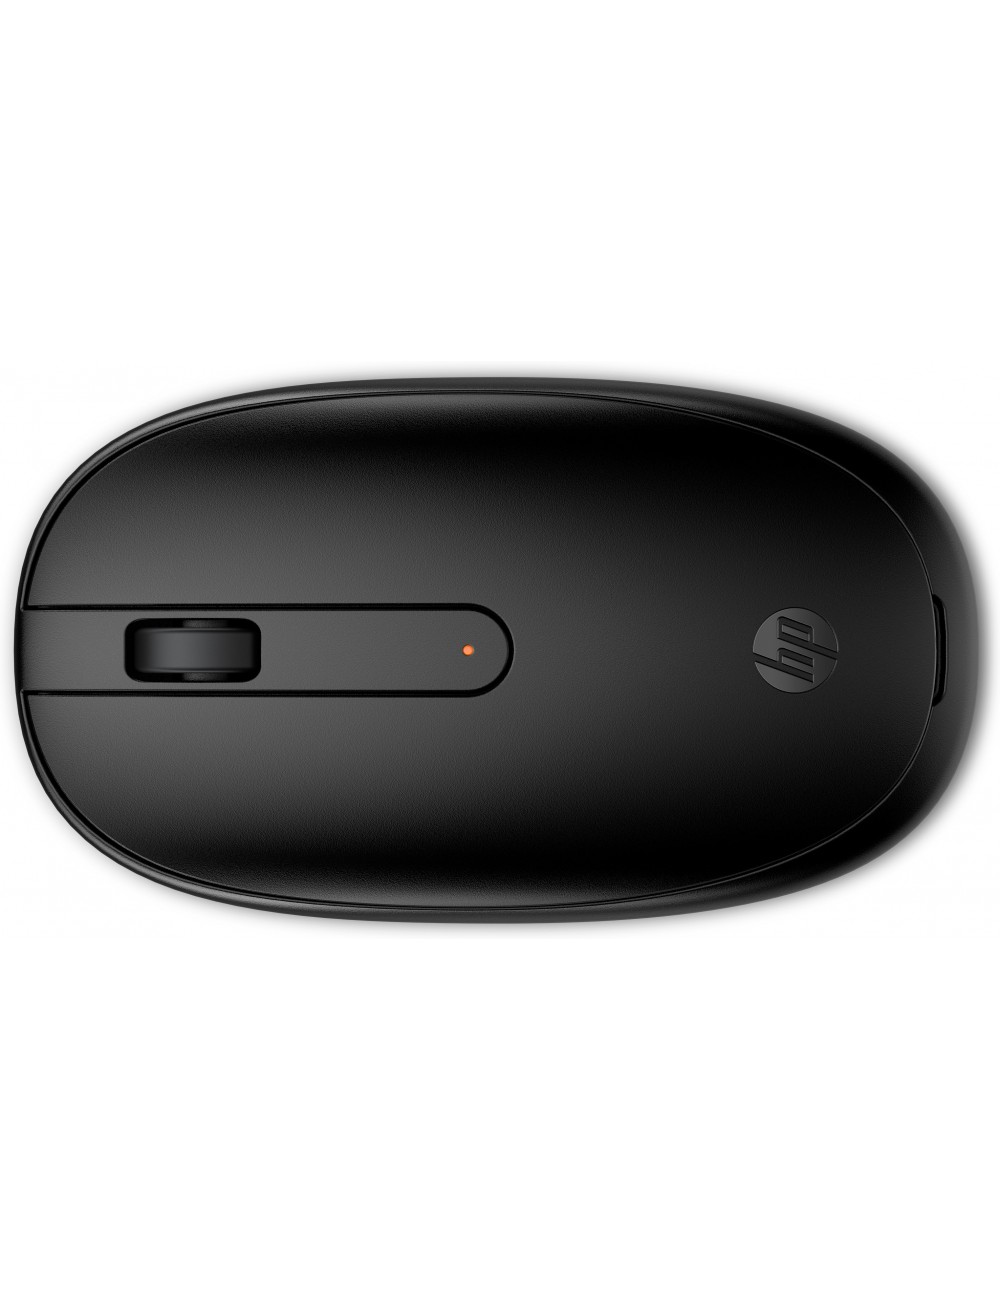 HP 245 Bluetooth Mouse